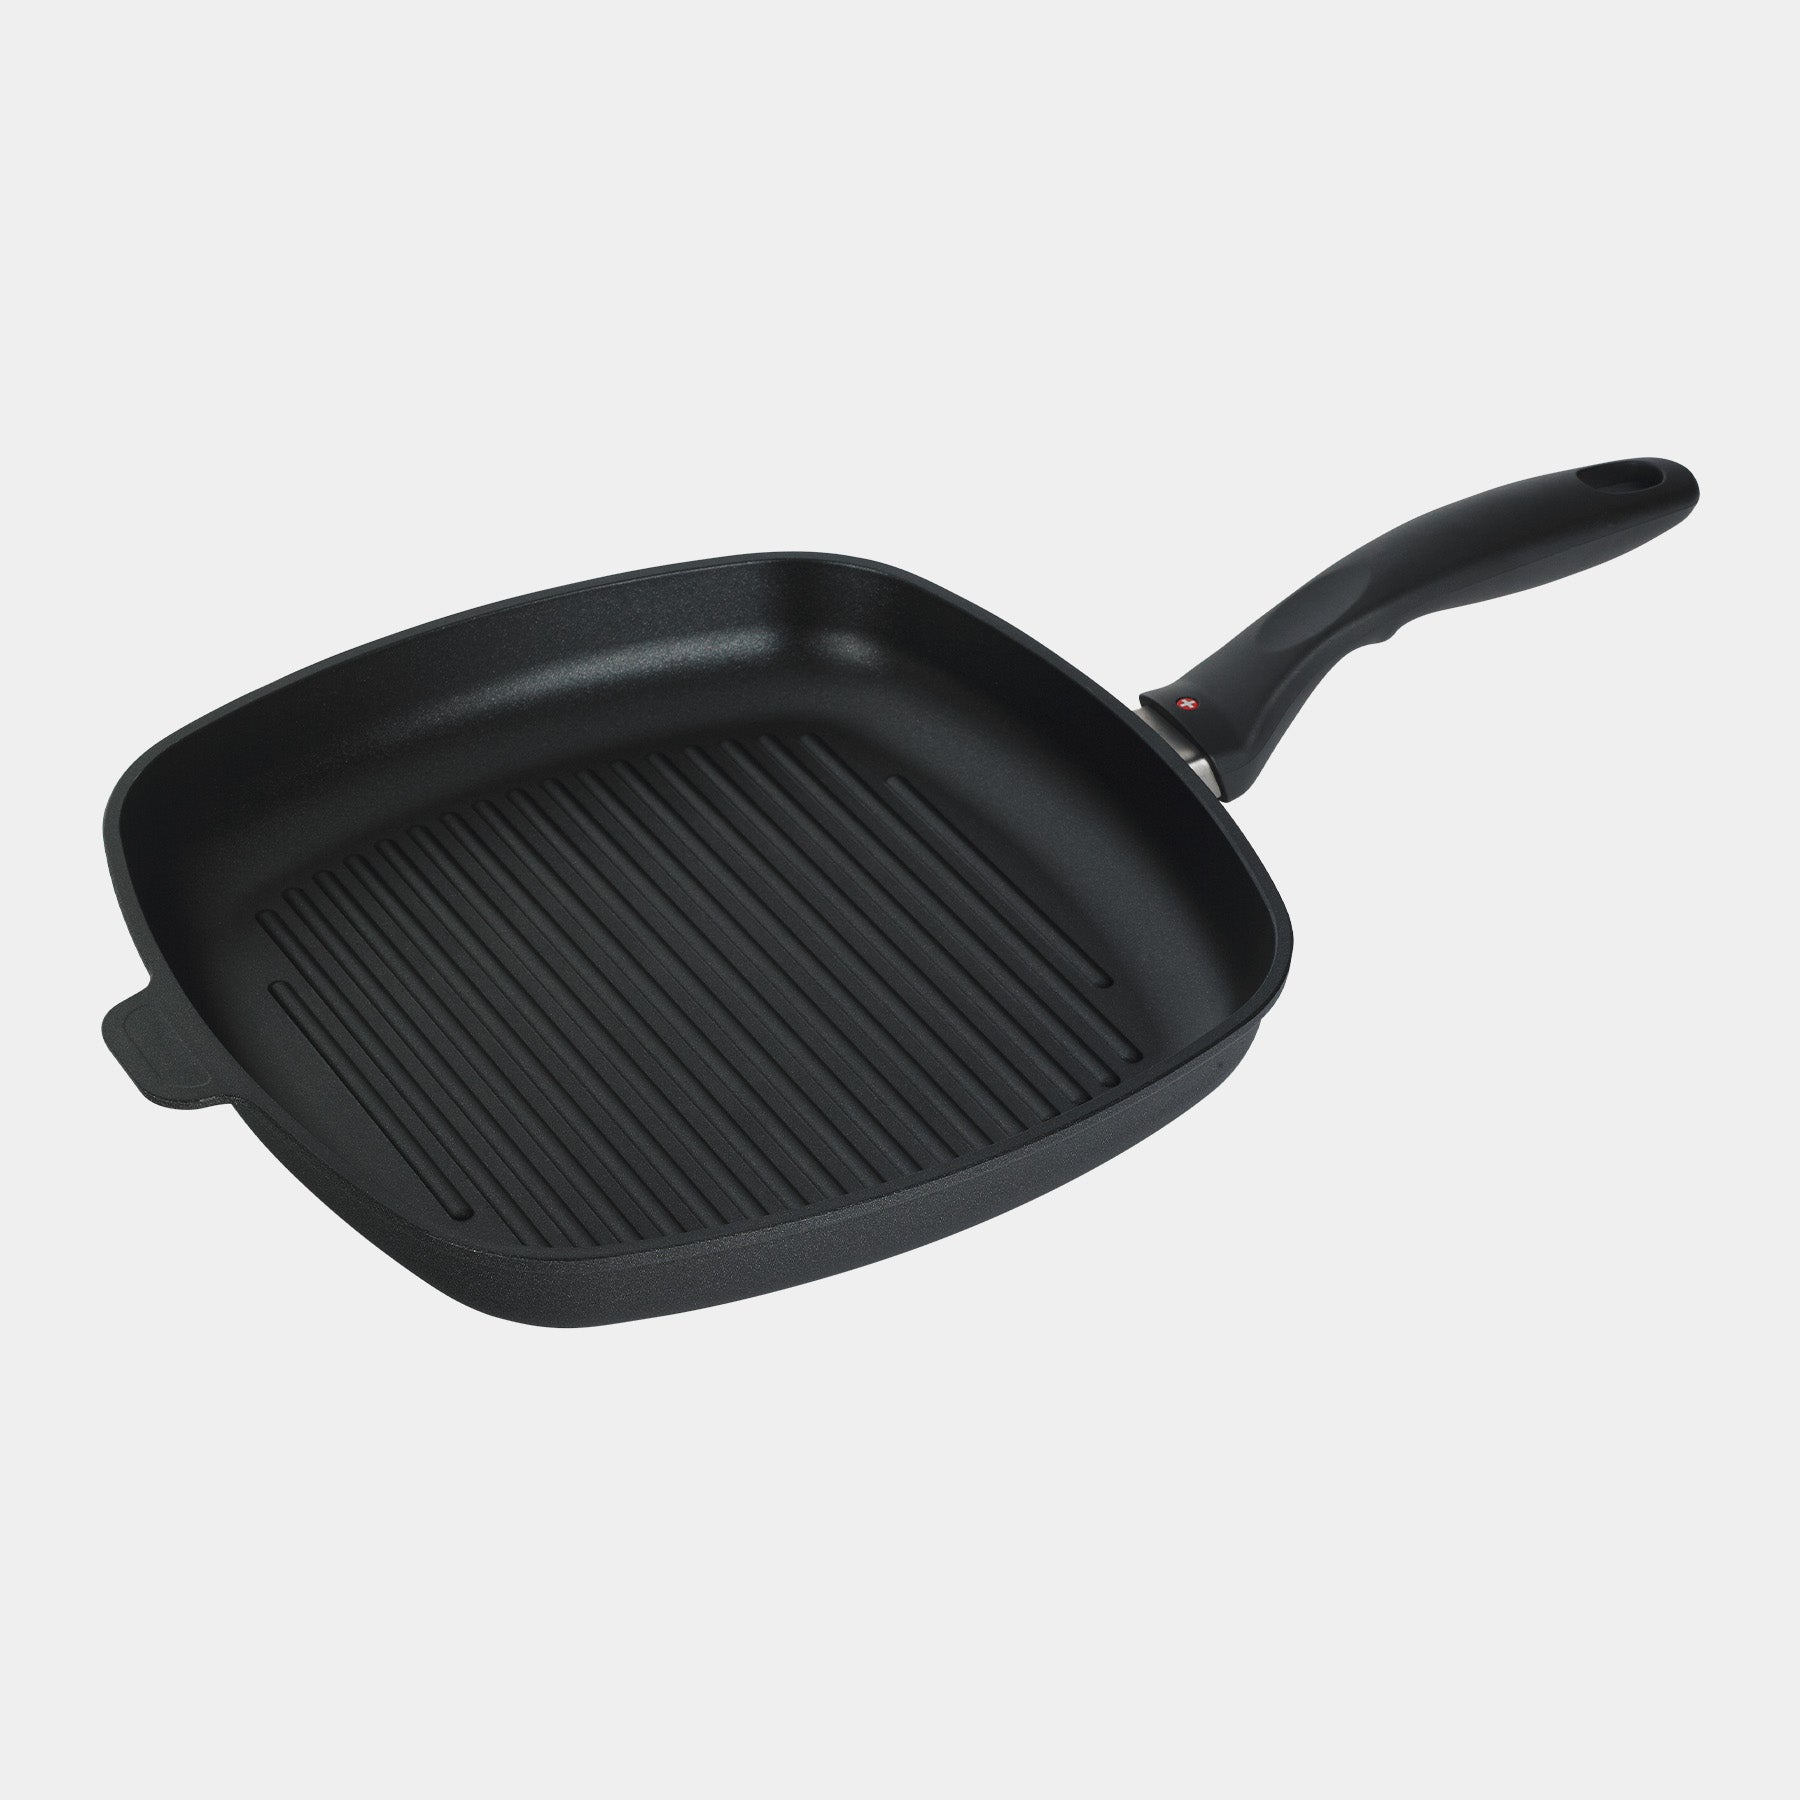 XD Nonstick 11" x 11" Square Grill Pan Top View